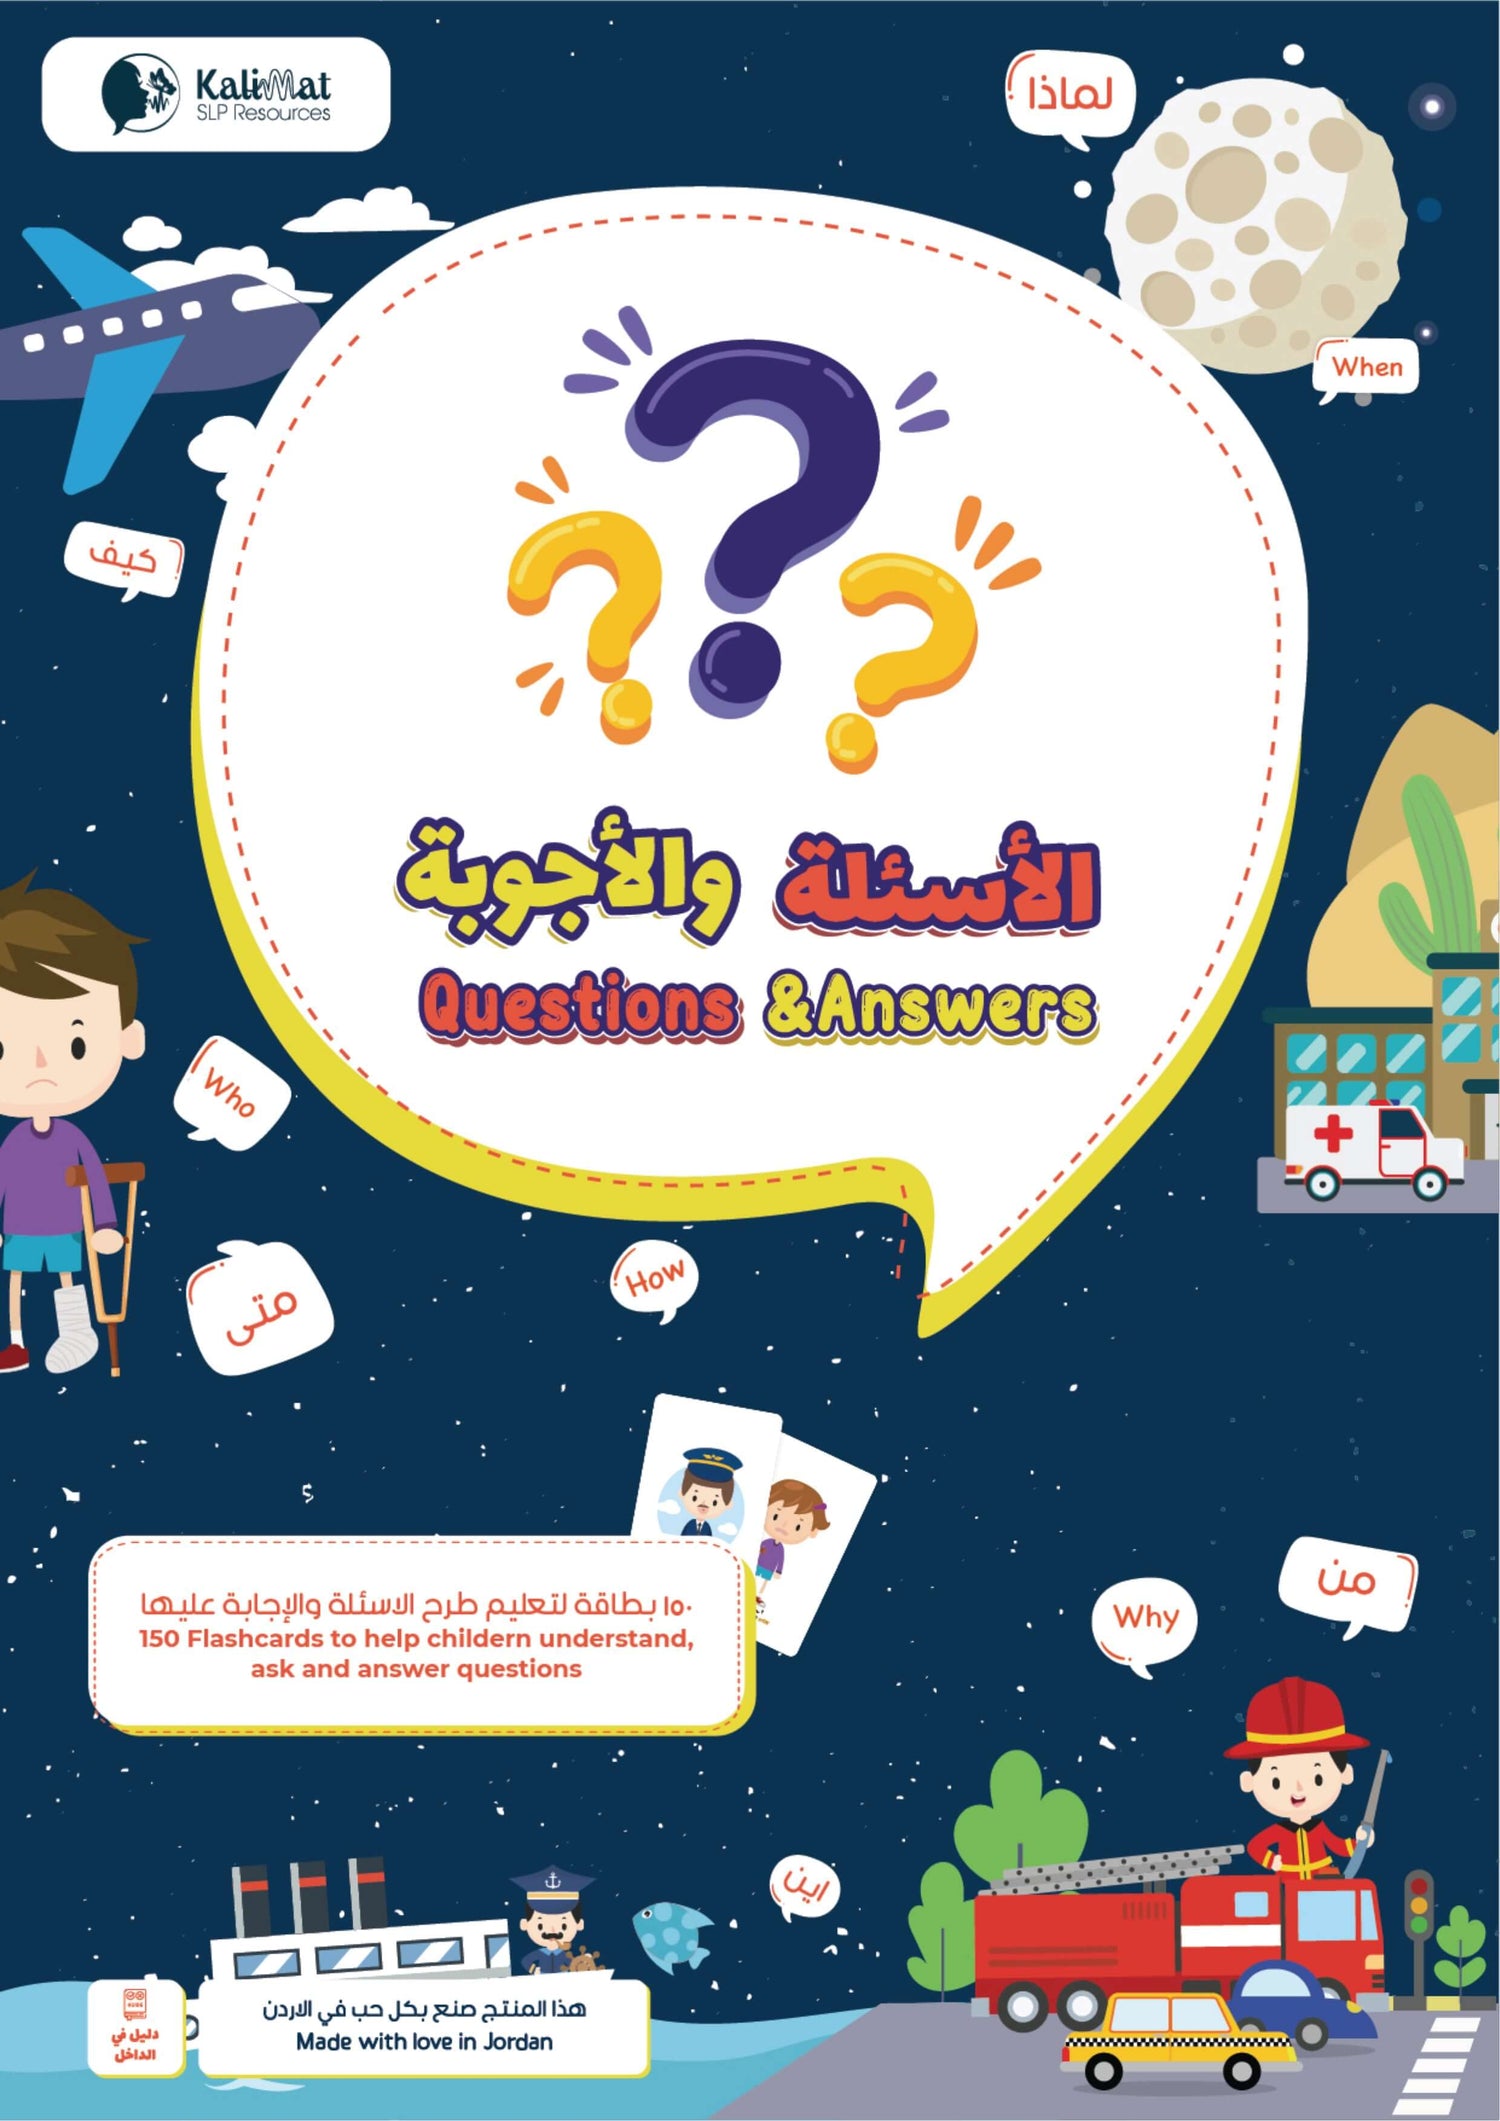 Questions and Answers - flashcard game from kalimat to enhance kids language